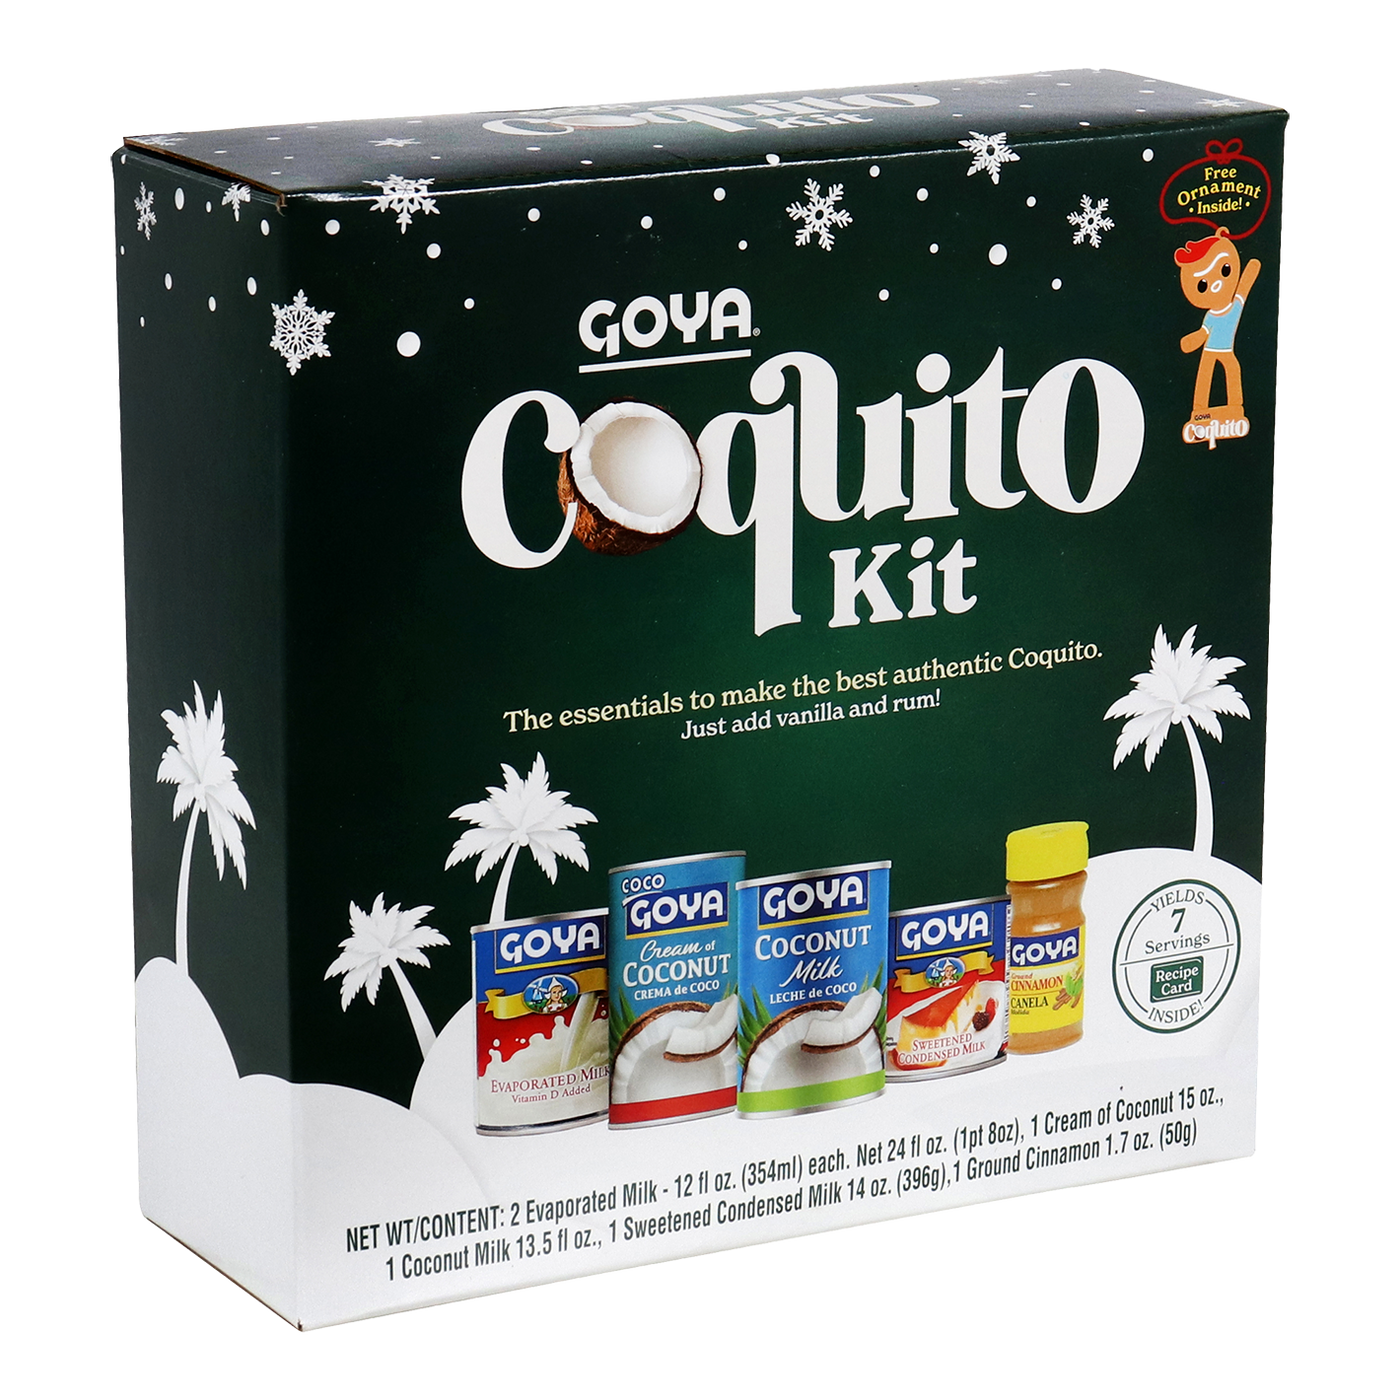 Holiday Coquito Drink Kit with Free Gingerbread Ornament!